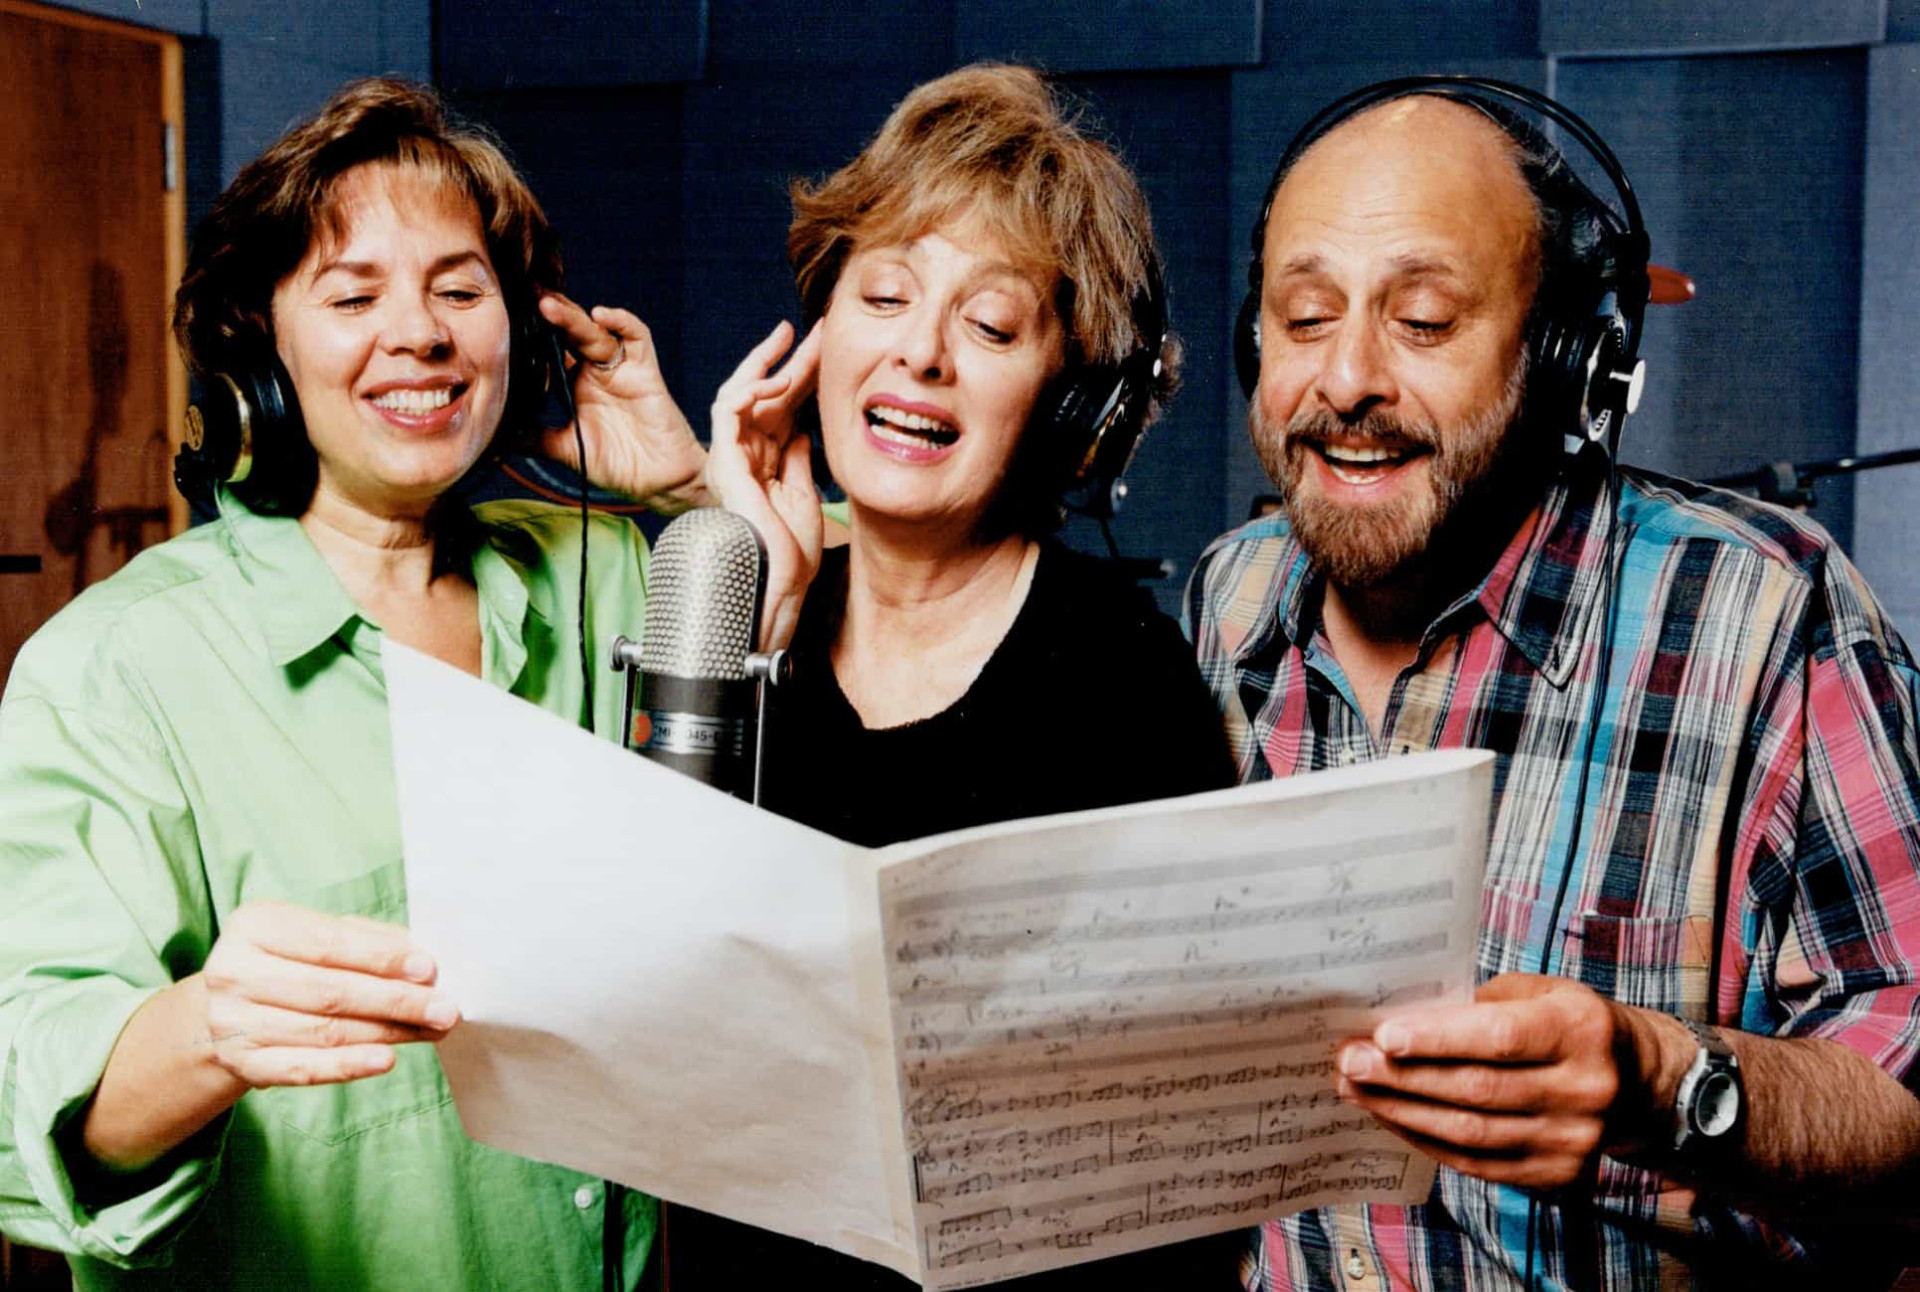 <p>The Canadian children's group Sharon, Lois & Bram really nailed it with this one. The song is all about saying "I love you" in a fun way. And of course, there's choreography!</p><p><a href="https://www.msn.com/en-us/community/channel/vid-7xx8mnucu55yw63we9va2gwr7uihbxwc68fxqp25x6tg4ftibpra?cvid=94631541bc0f4f89bfd59158d696ad7e">Follow us and access great exclusive content every day</a></p>